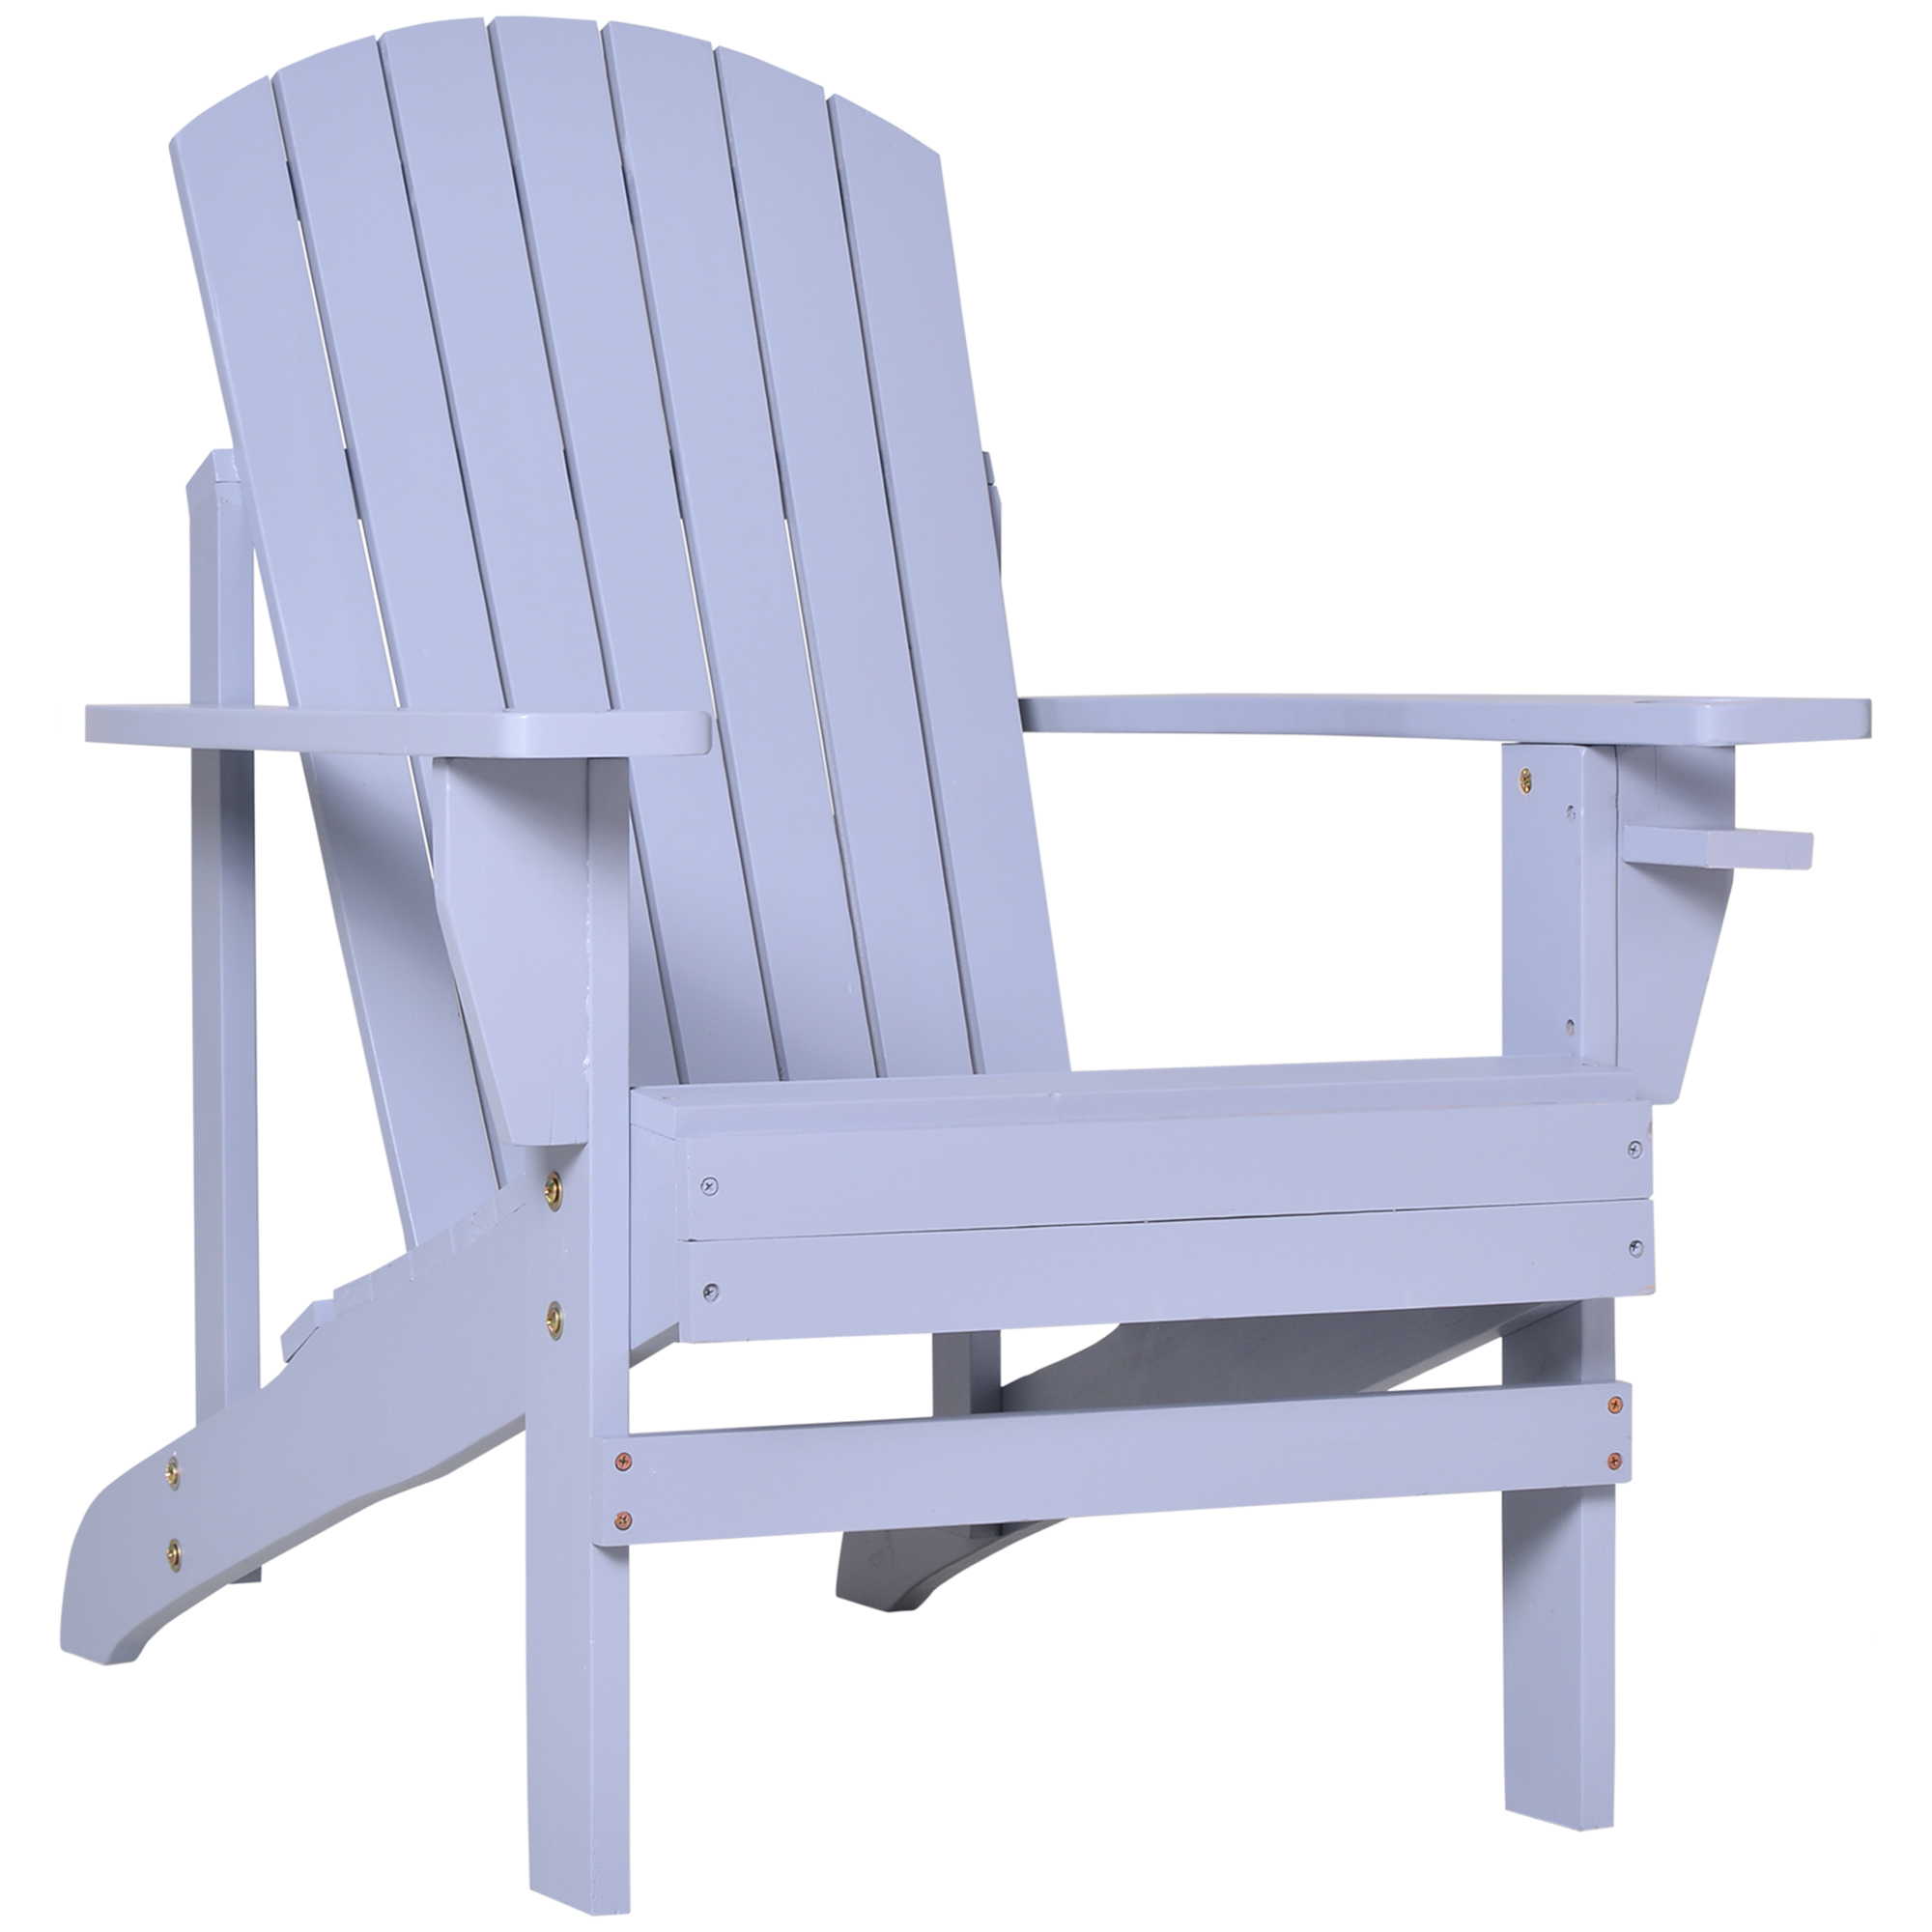 Outsunny Wooden Adirondack Chair, Outdoor Patio Lawn Chair with Cup Holder, Weather Resistant Lawn Furniture, Classic Lounge for Deck, Garden, Backyard, Fire Pit, Gray - image 1 of 9